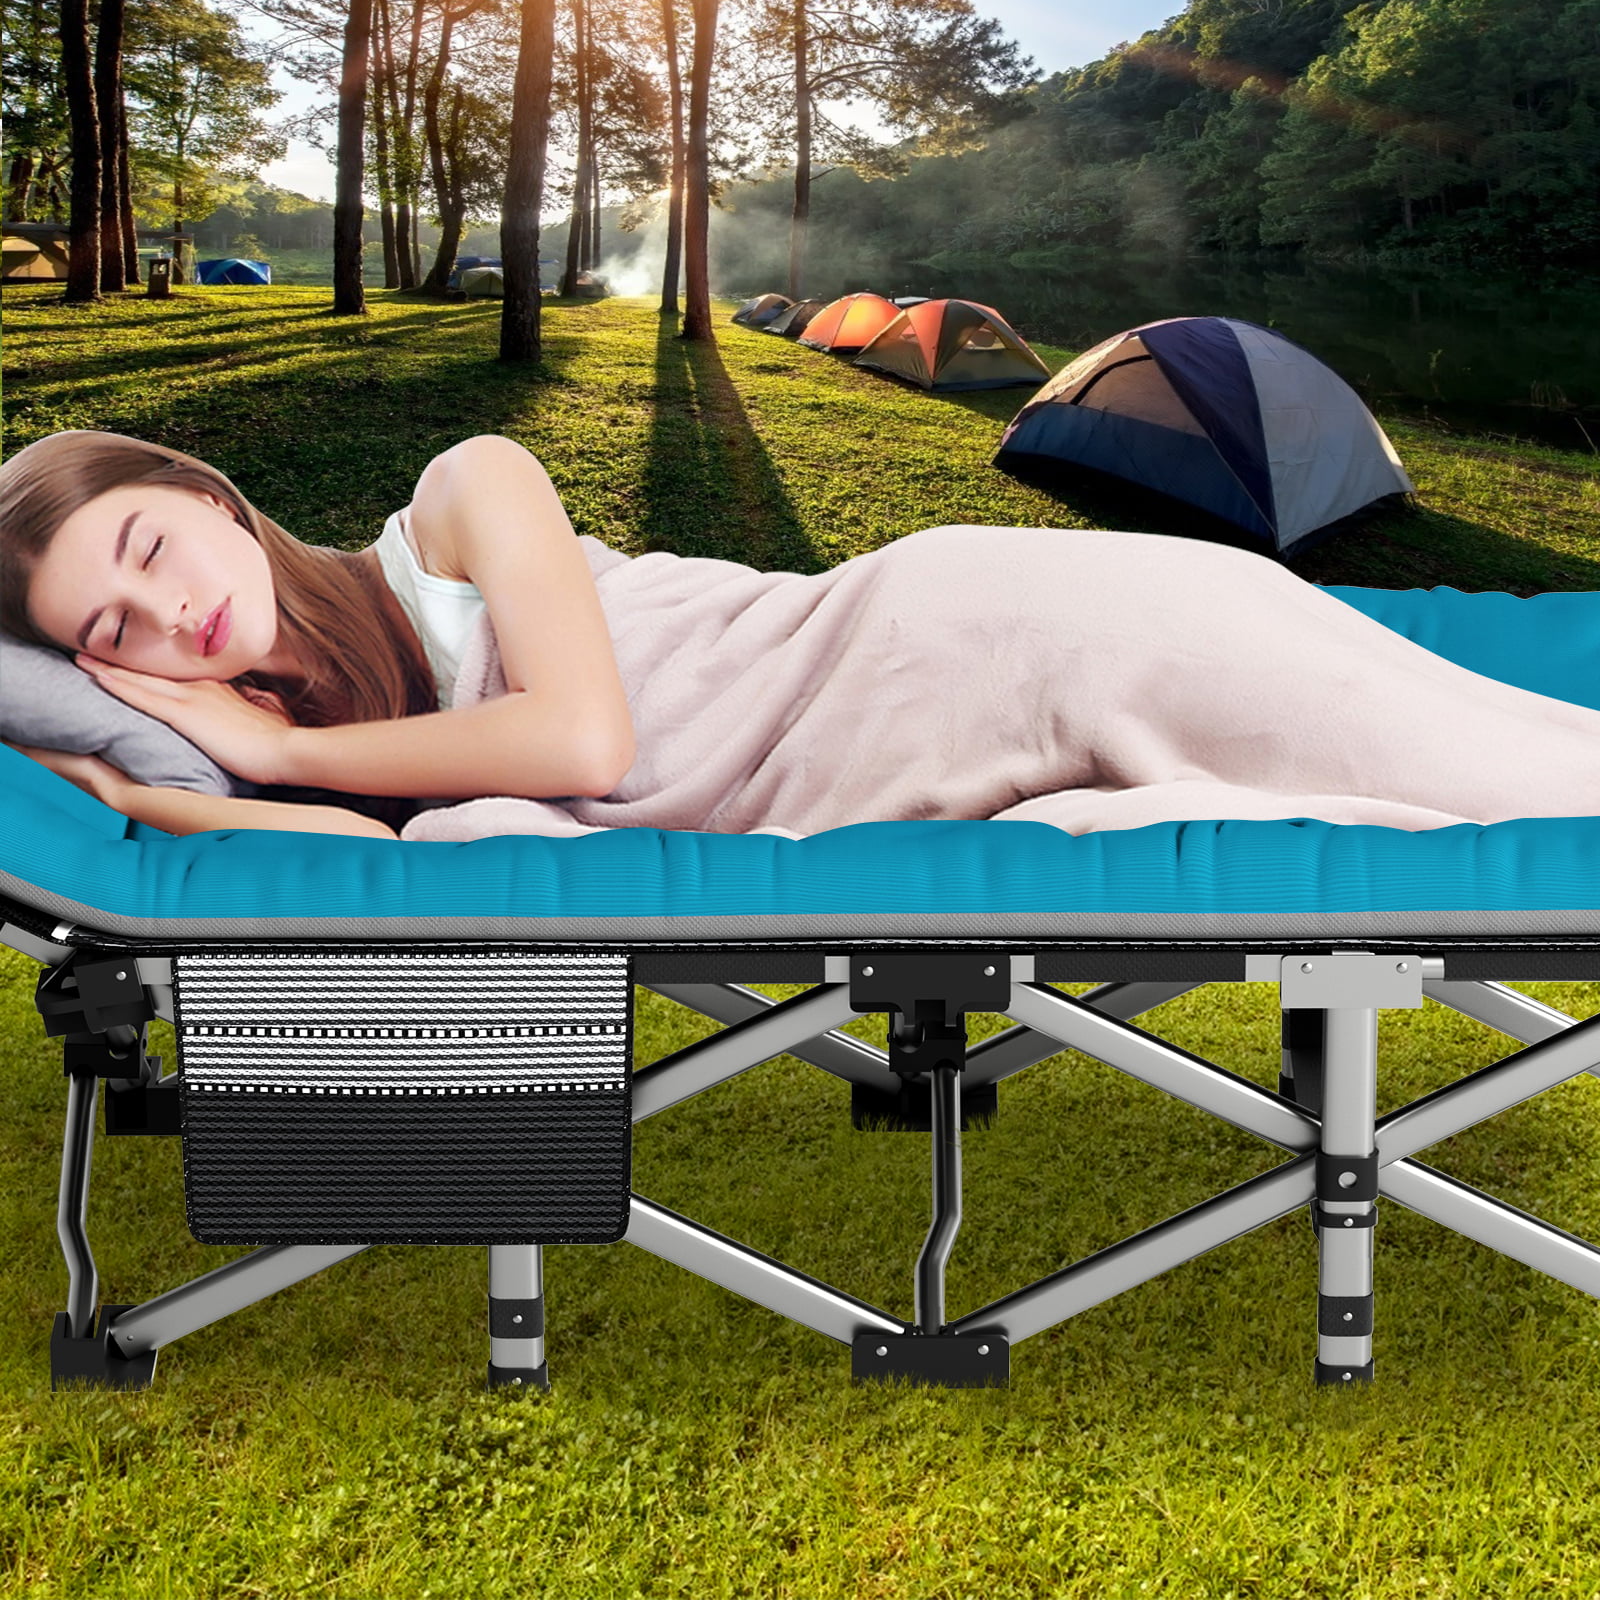 lavabo Principiante novedad Lilypelle Folding Camping Cot, Double Layer Oxford Strong Heavy Duty  Sleeping Cots with Carry Bag, Portable Travel Camp Cots for Home/Office Nap  and Beach Vacation - Walmart.com